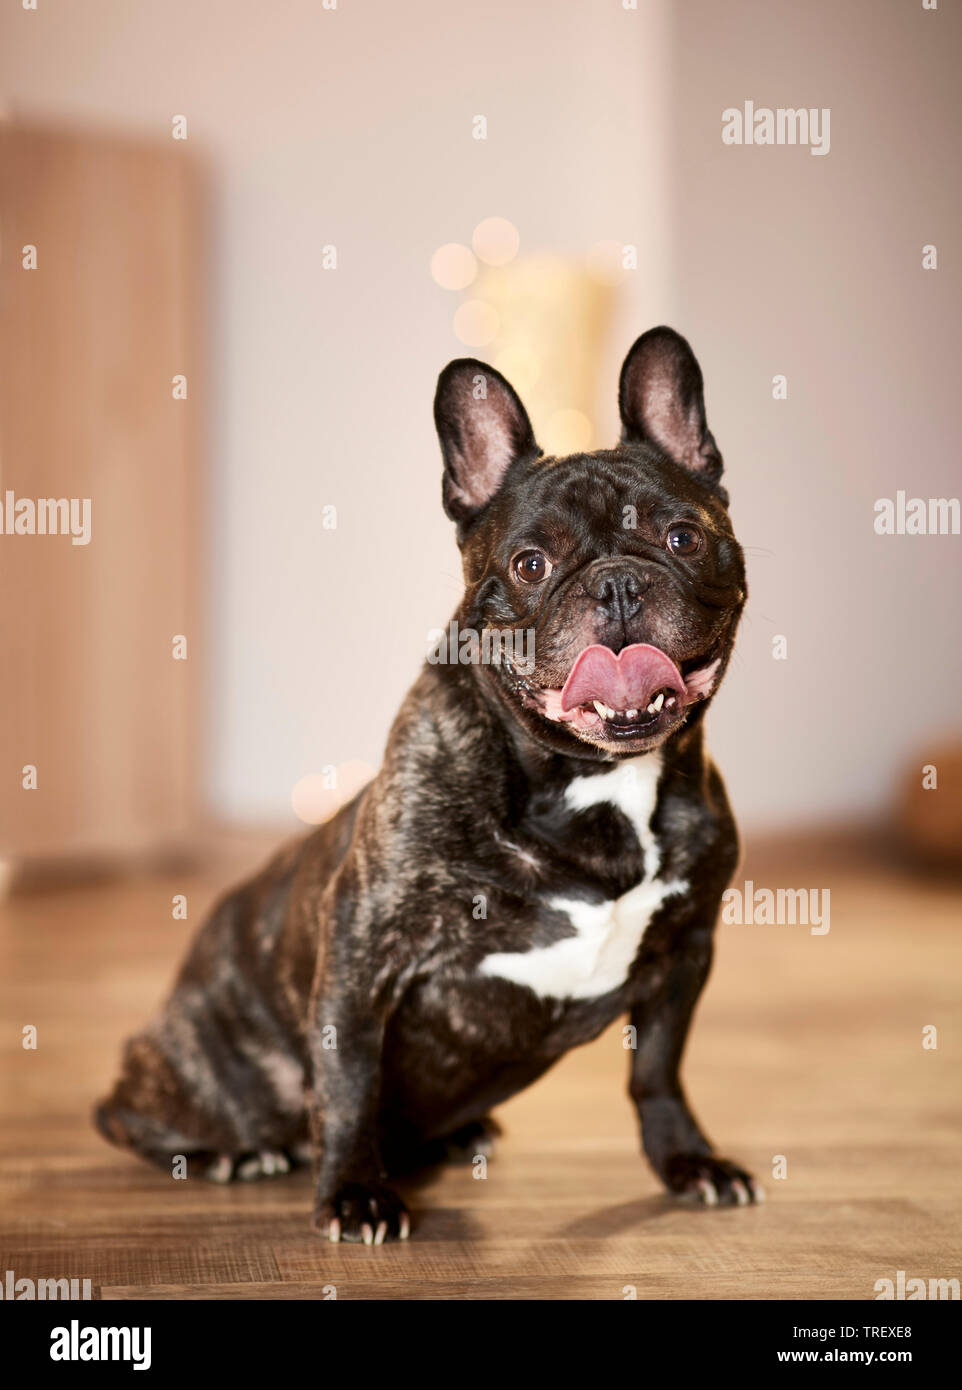 French Bulldog. Adult dog sitting in an apartement decorated for Christmas. Germany Stock Photo